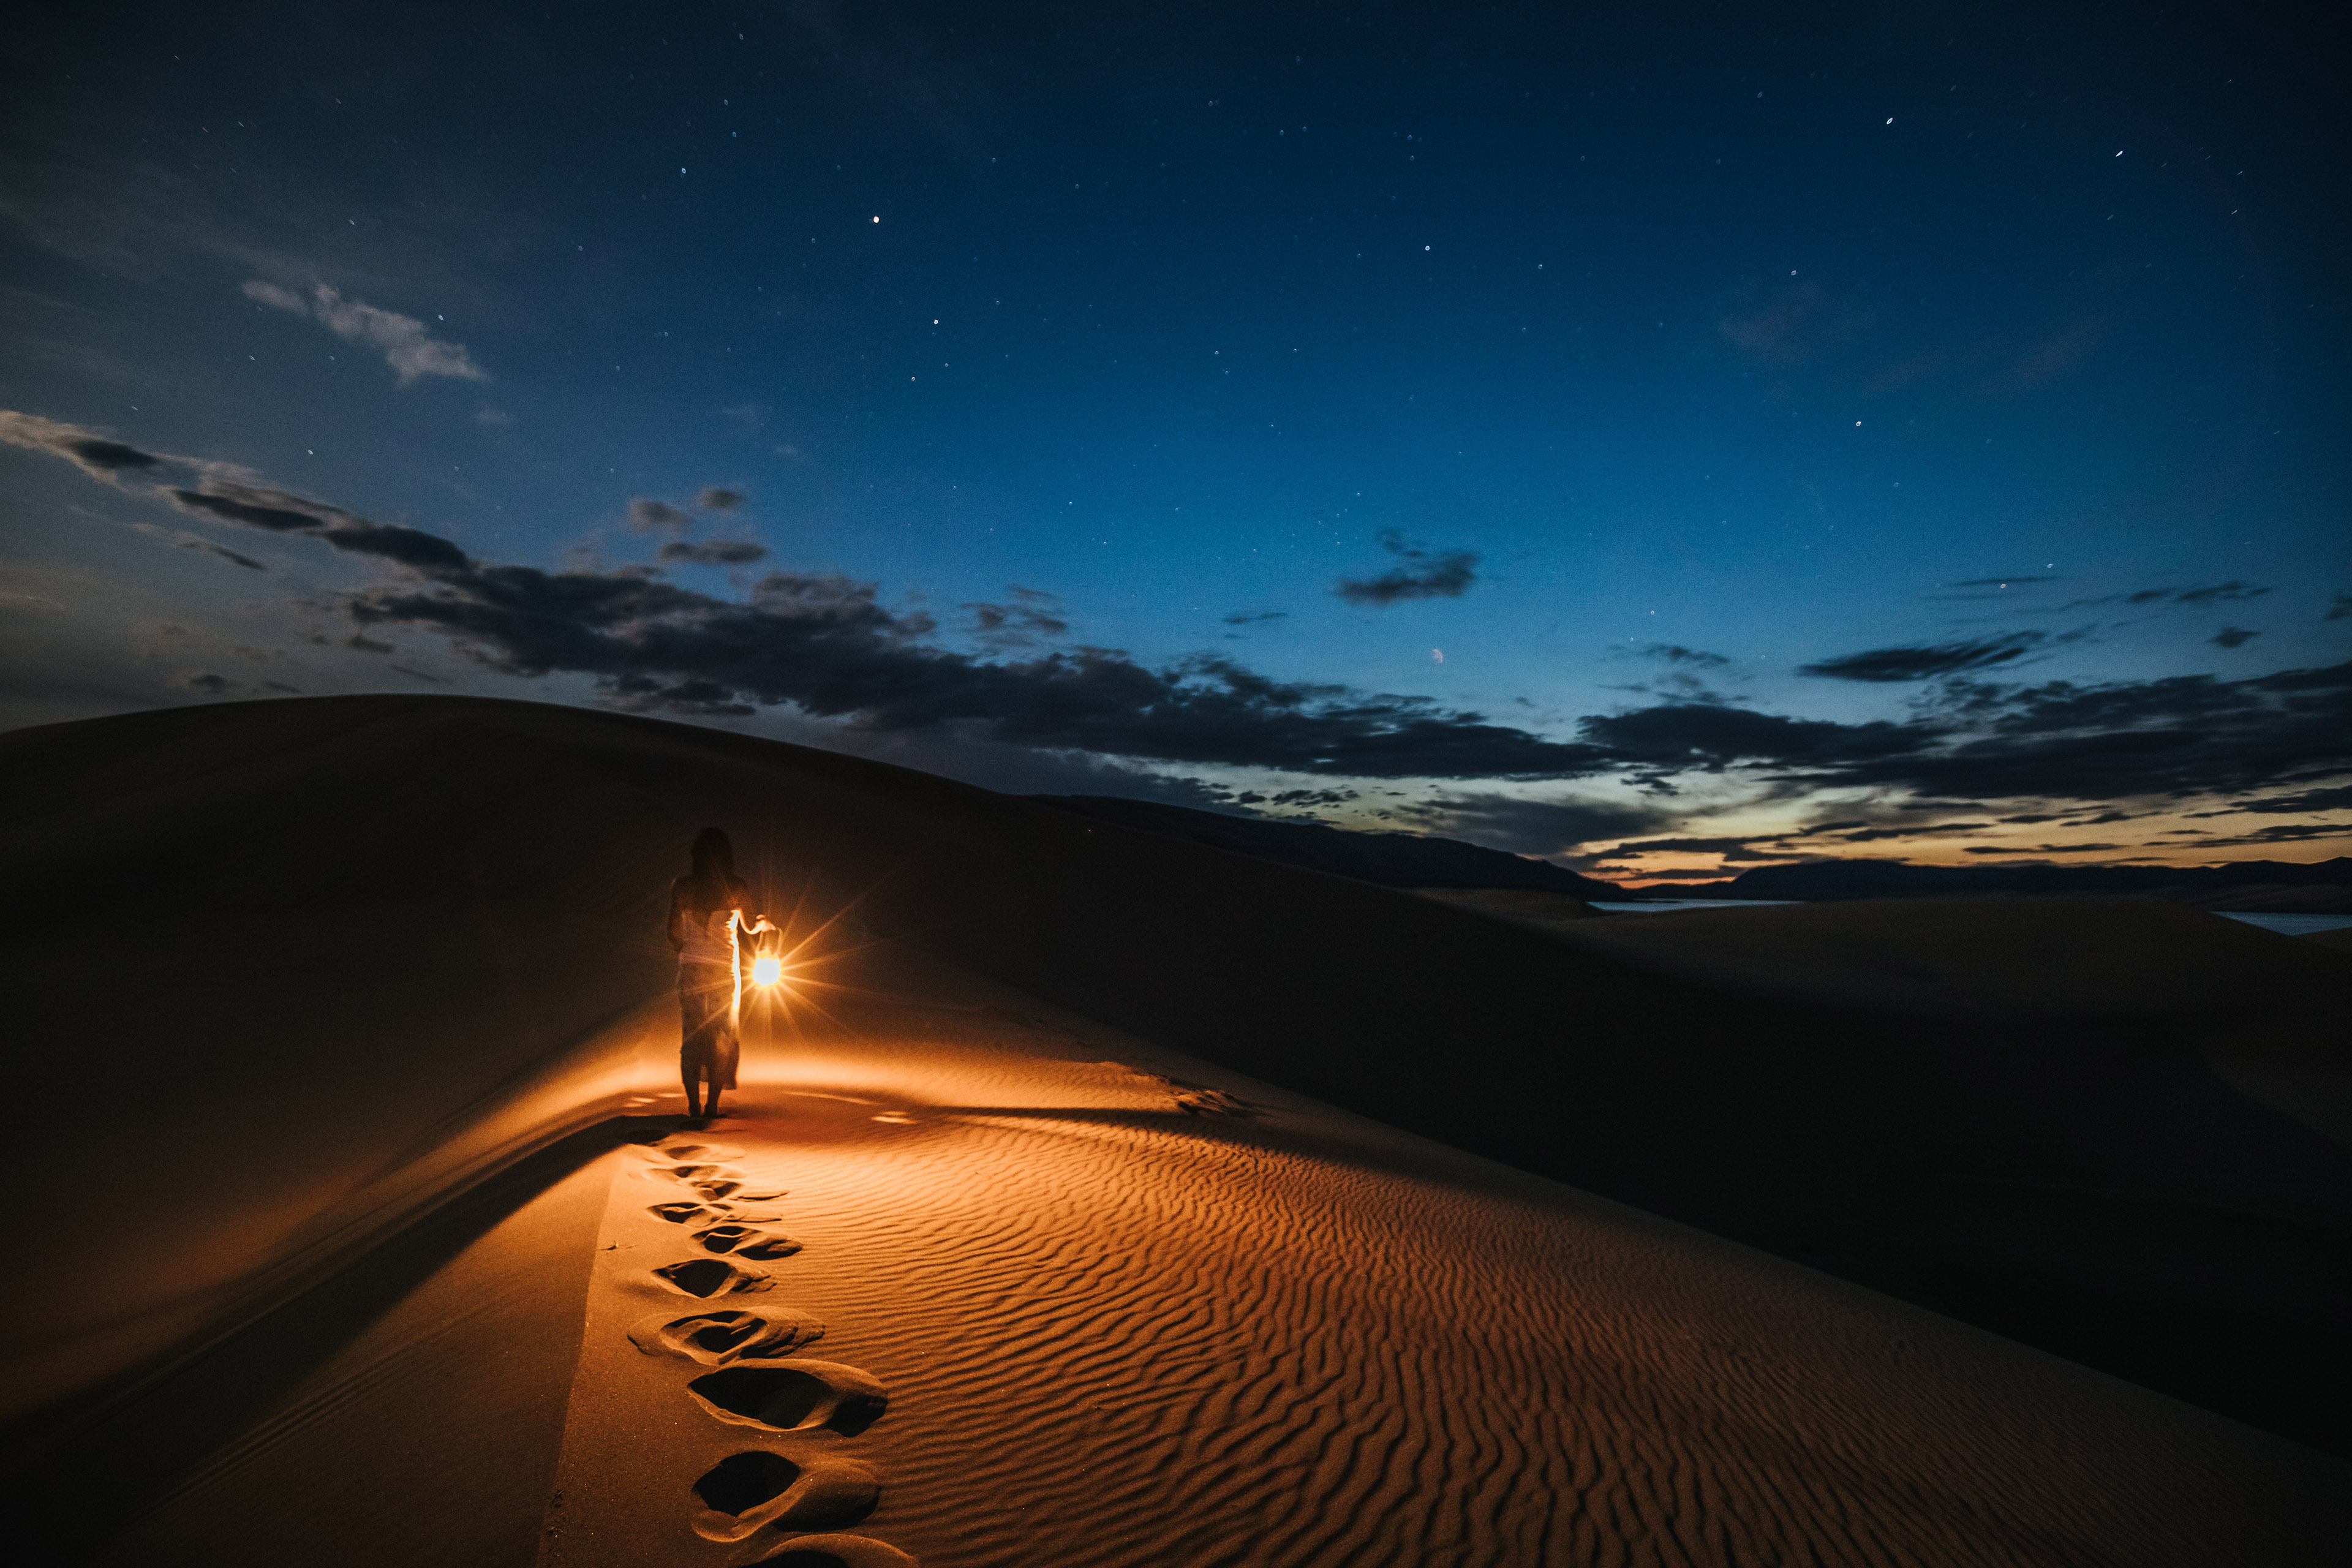 Portrait of a woman with lantern walking on sand dunes at night